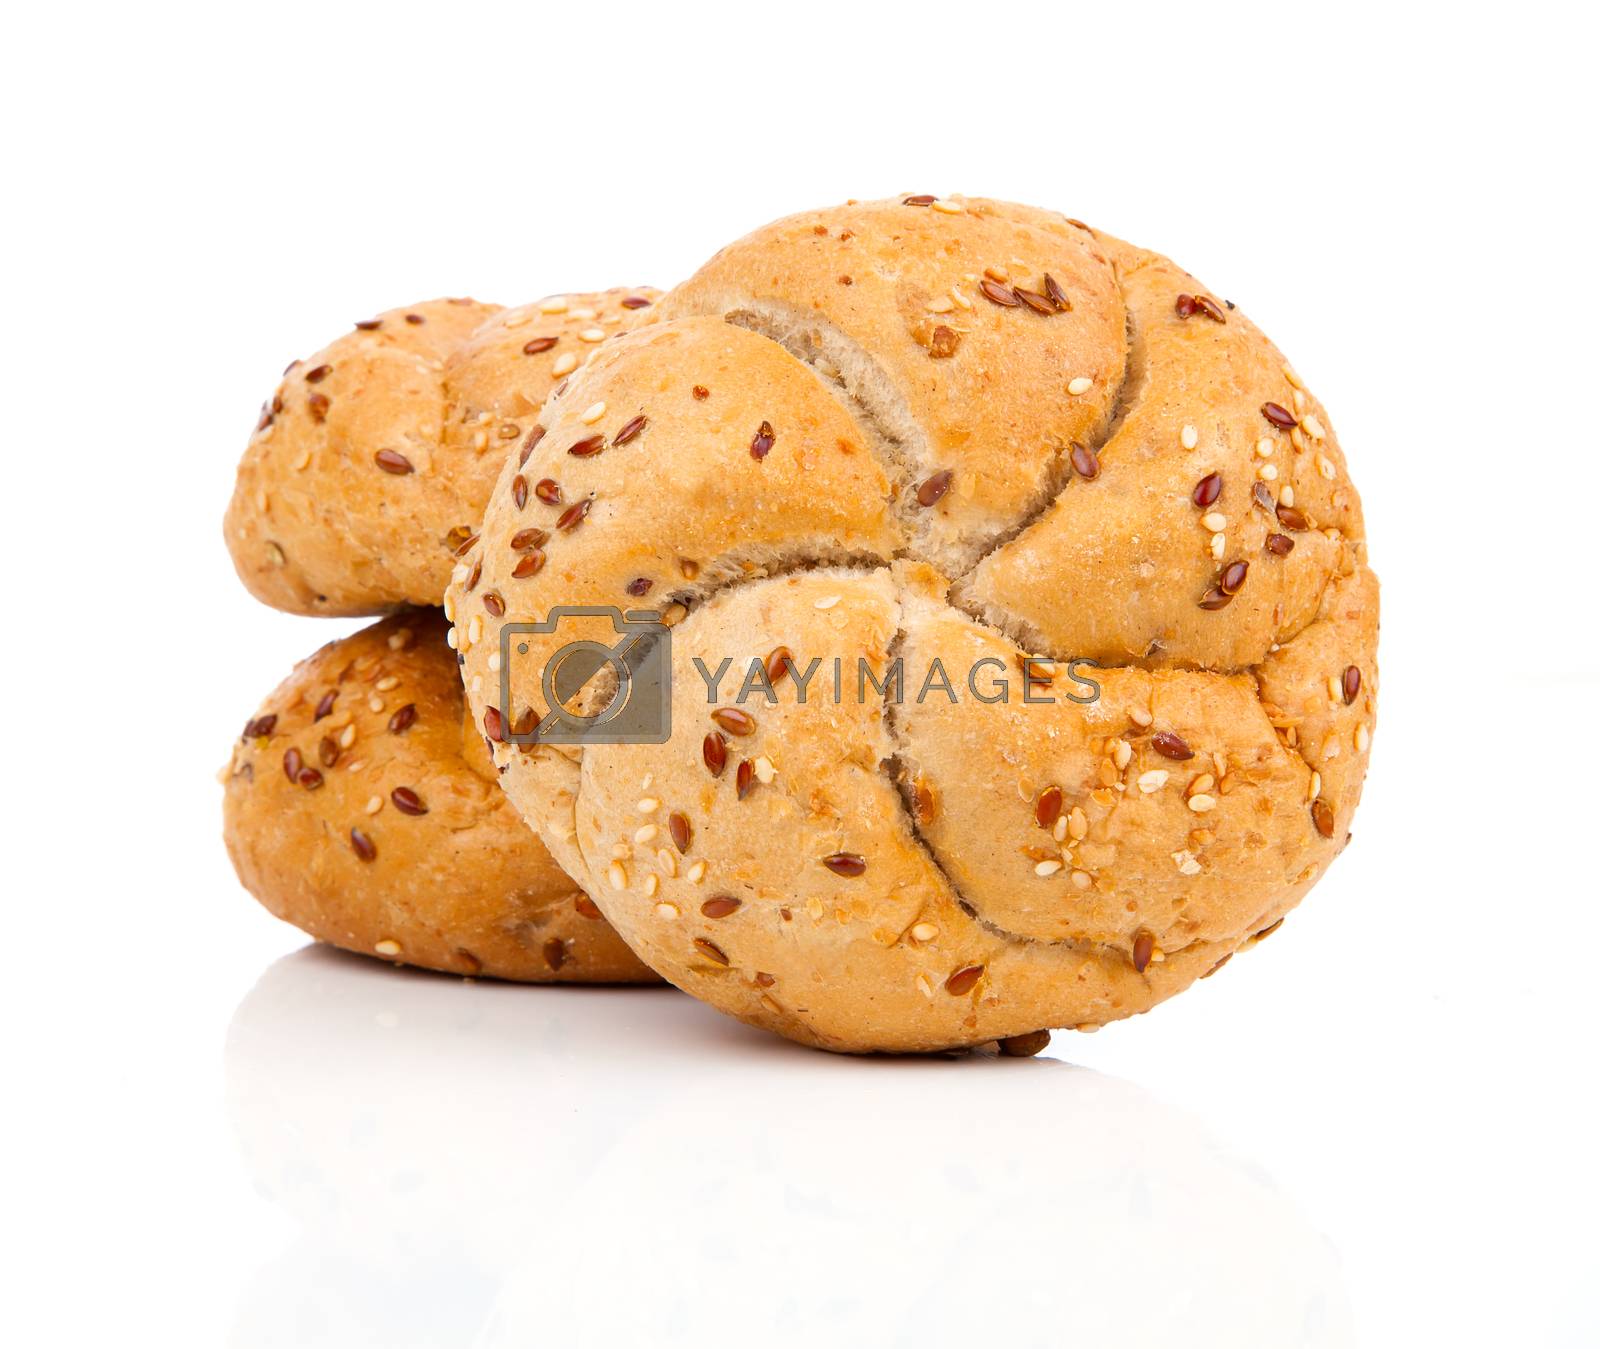 Royalty free image of Kaiser roll with sesame seeds, on a white background by motorolka